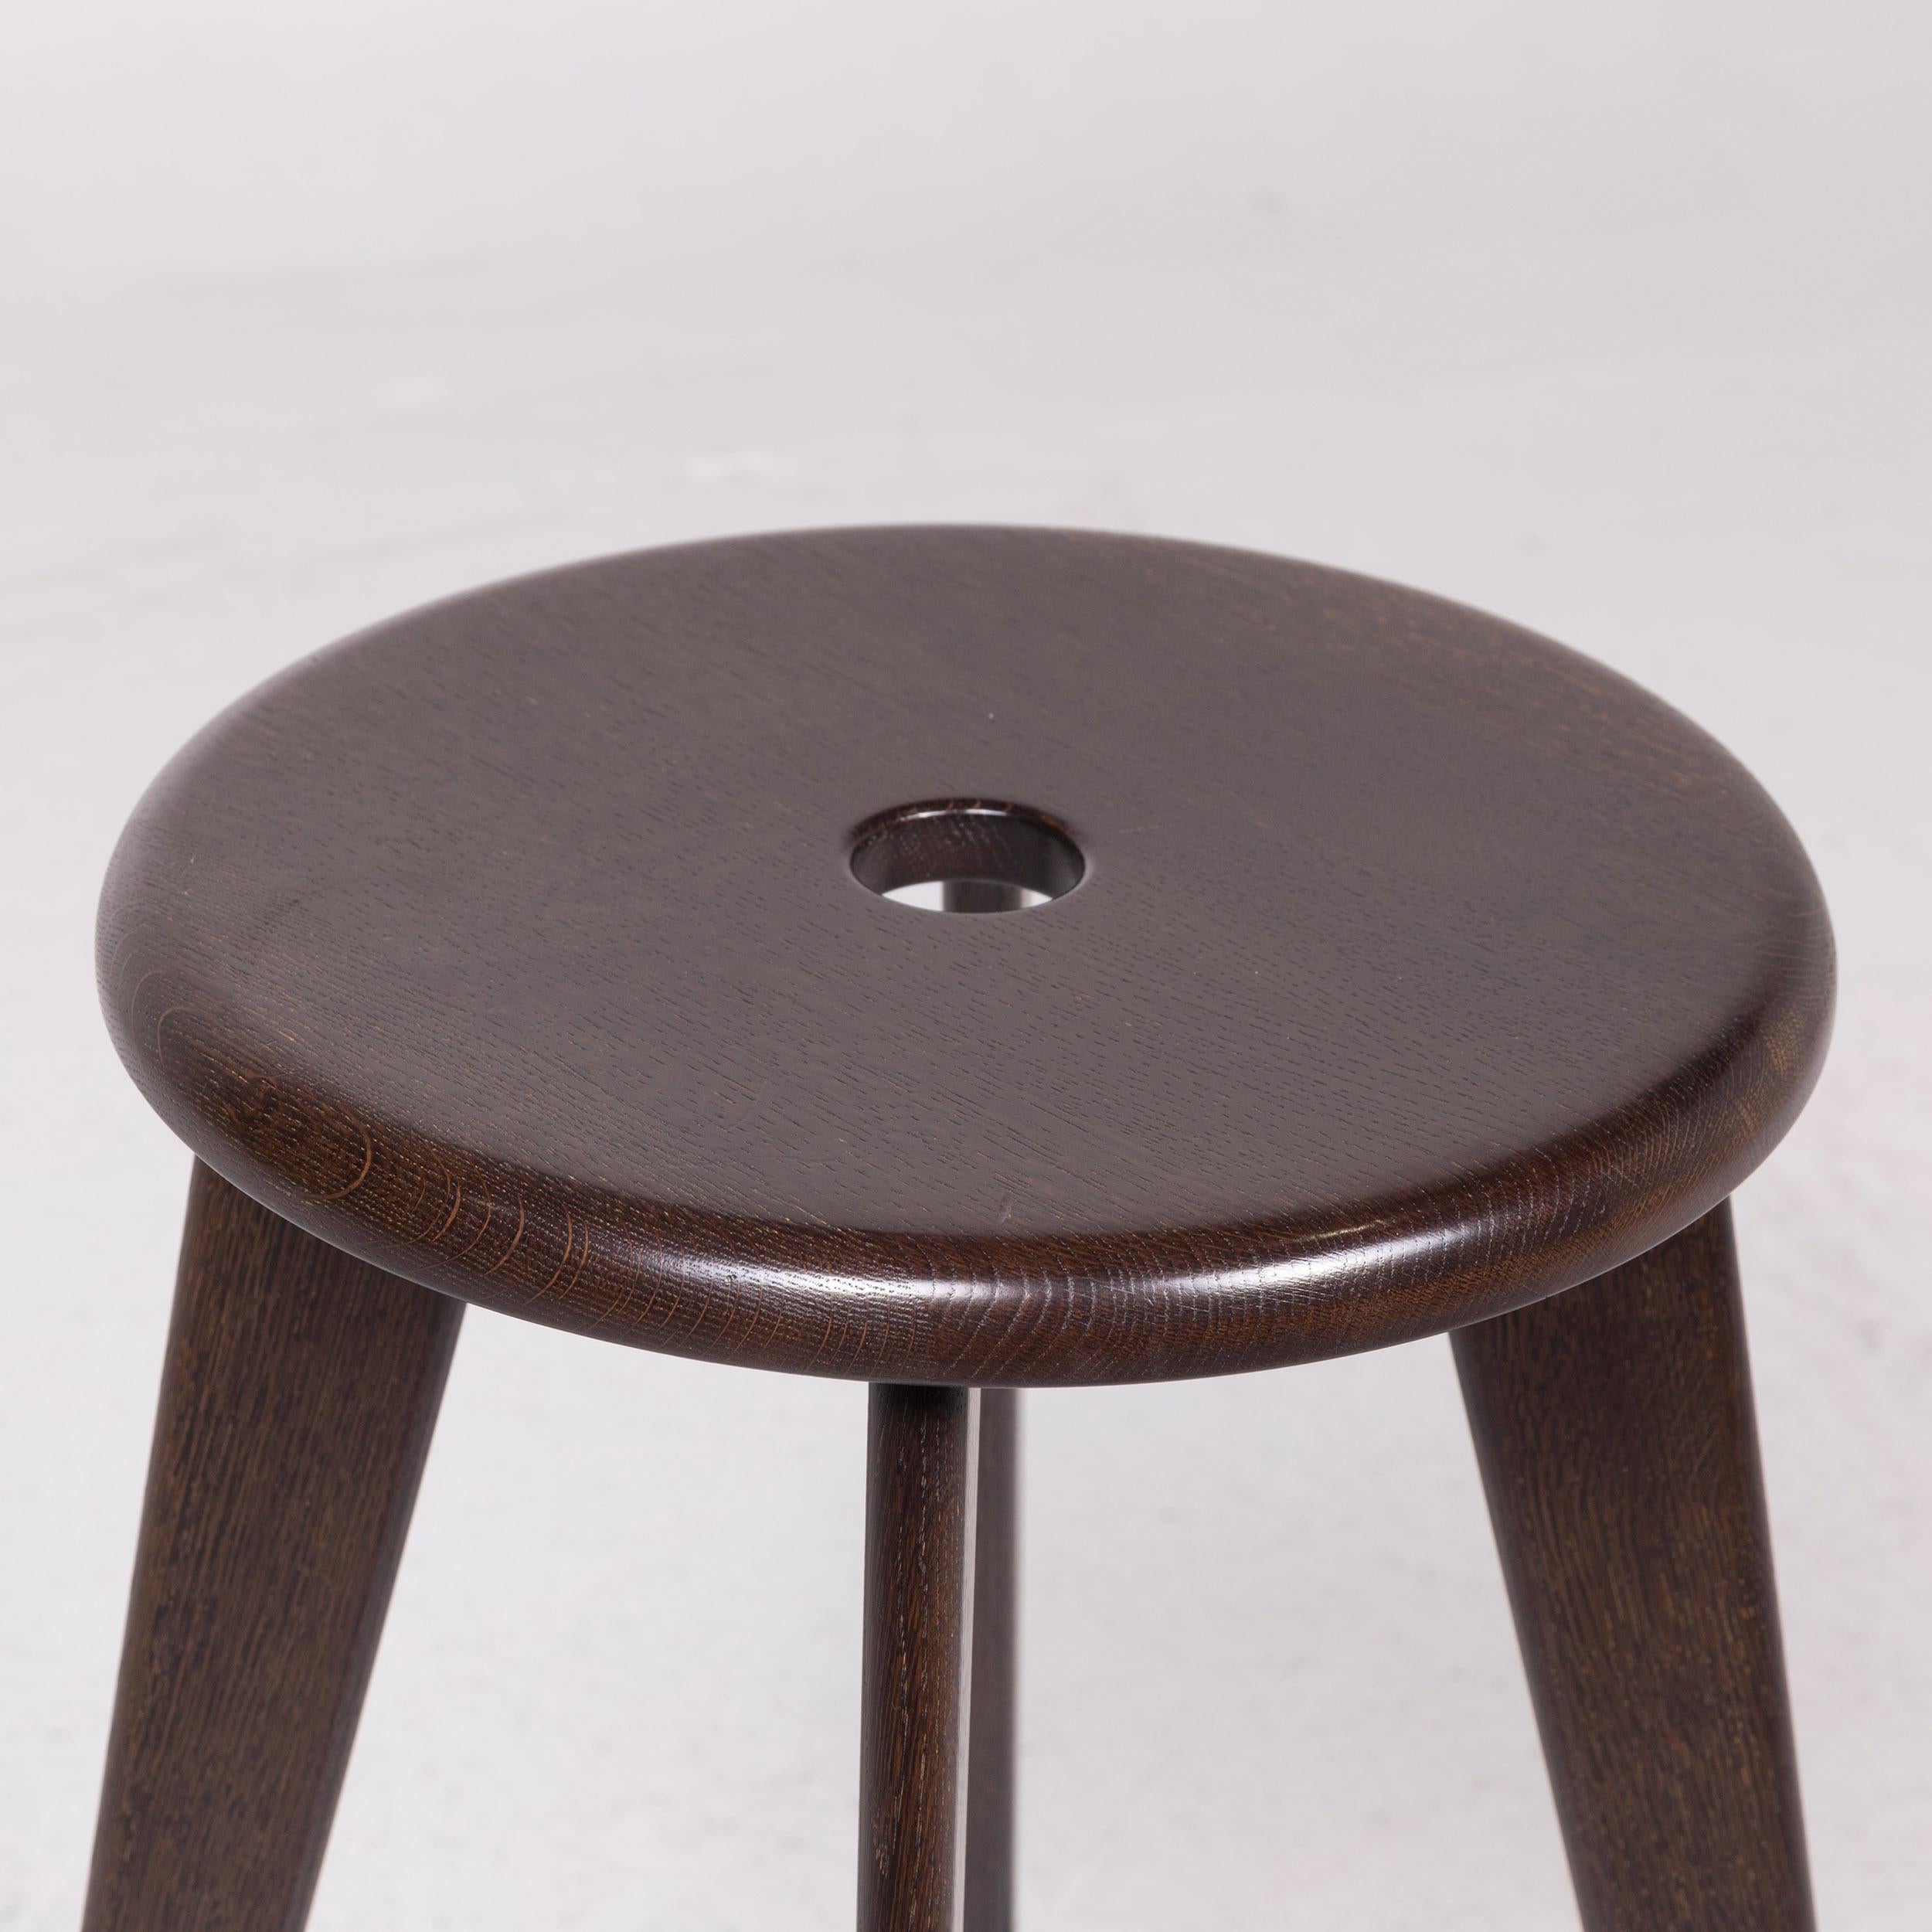 Contemporary Vitra Tabouret Skin Wood Stool Set Brown